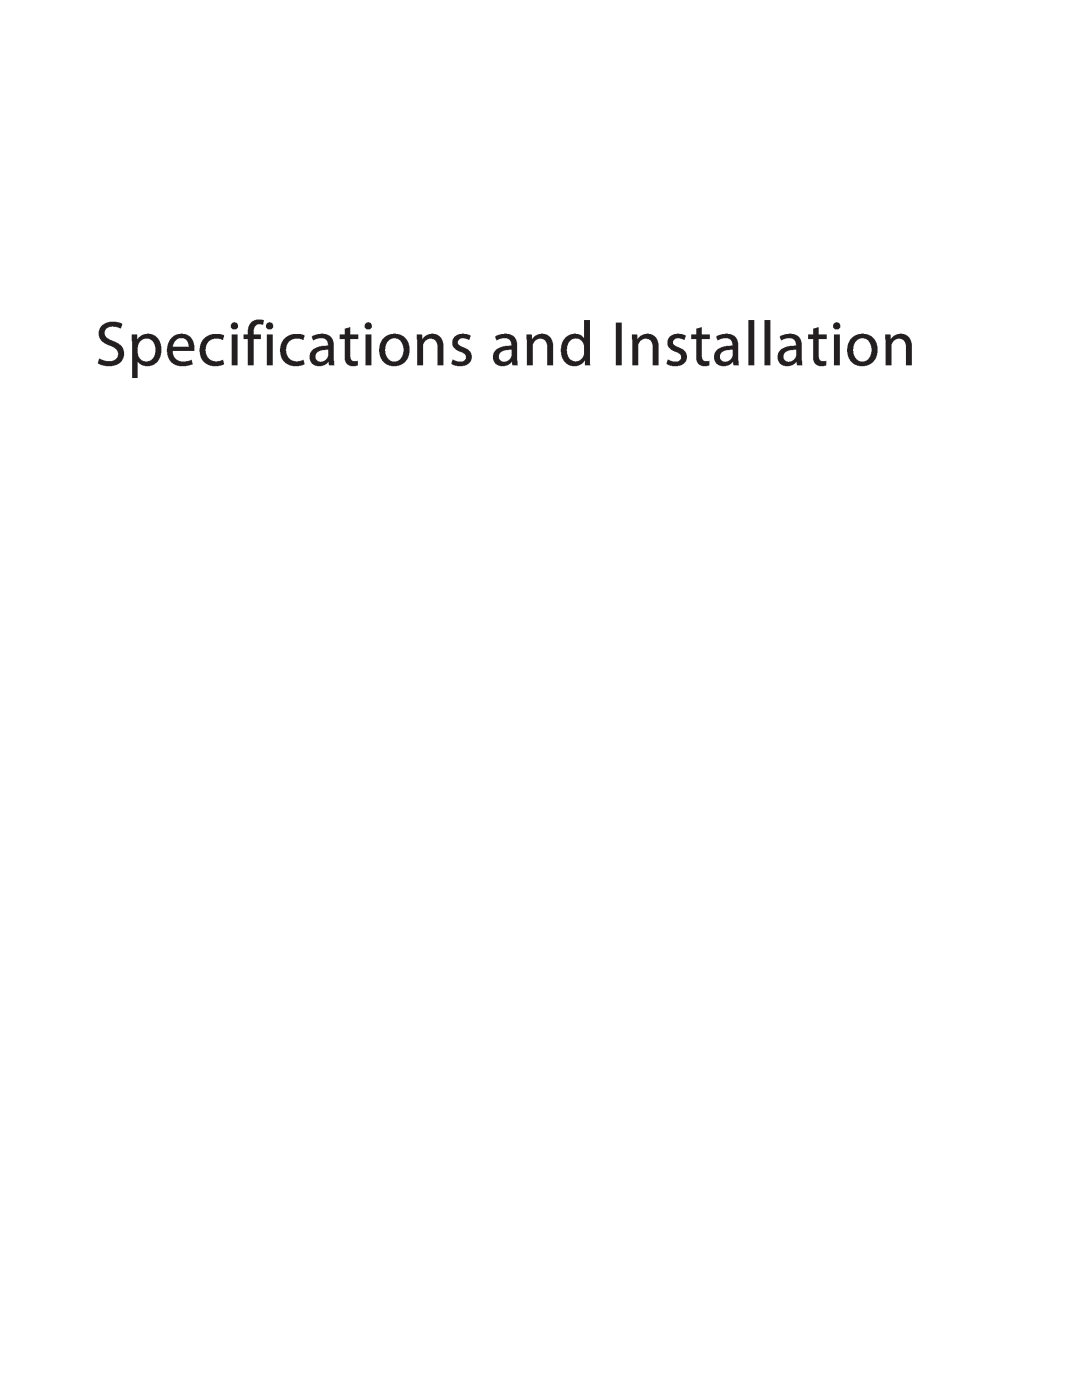 Turbo Chef Technologies i5 service manual Specifications and Installation 